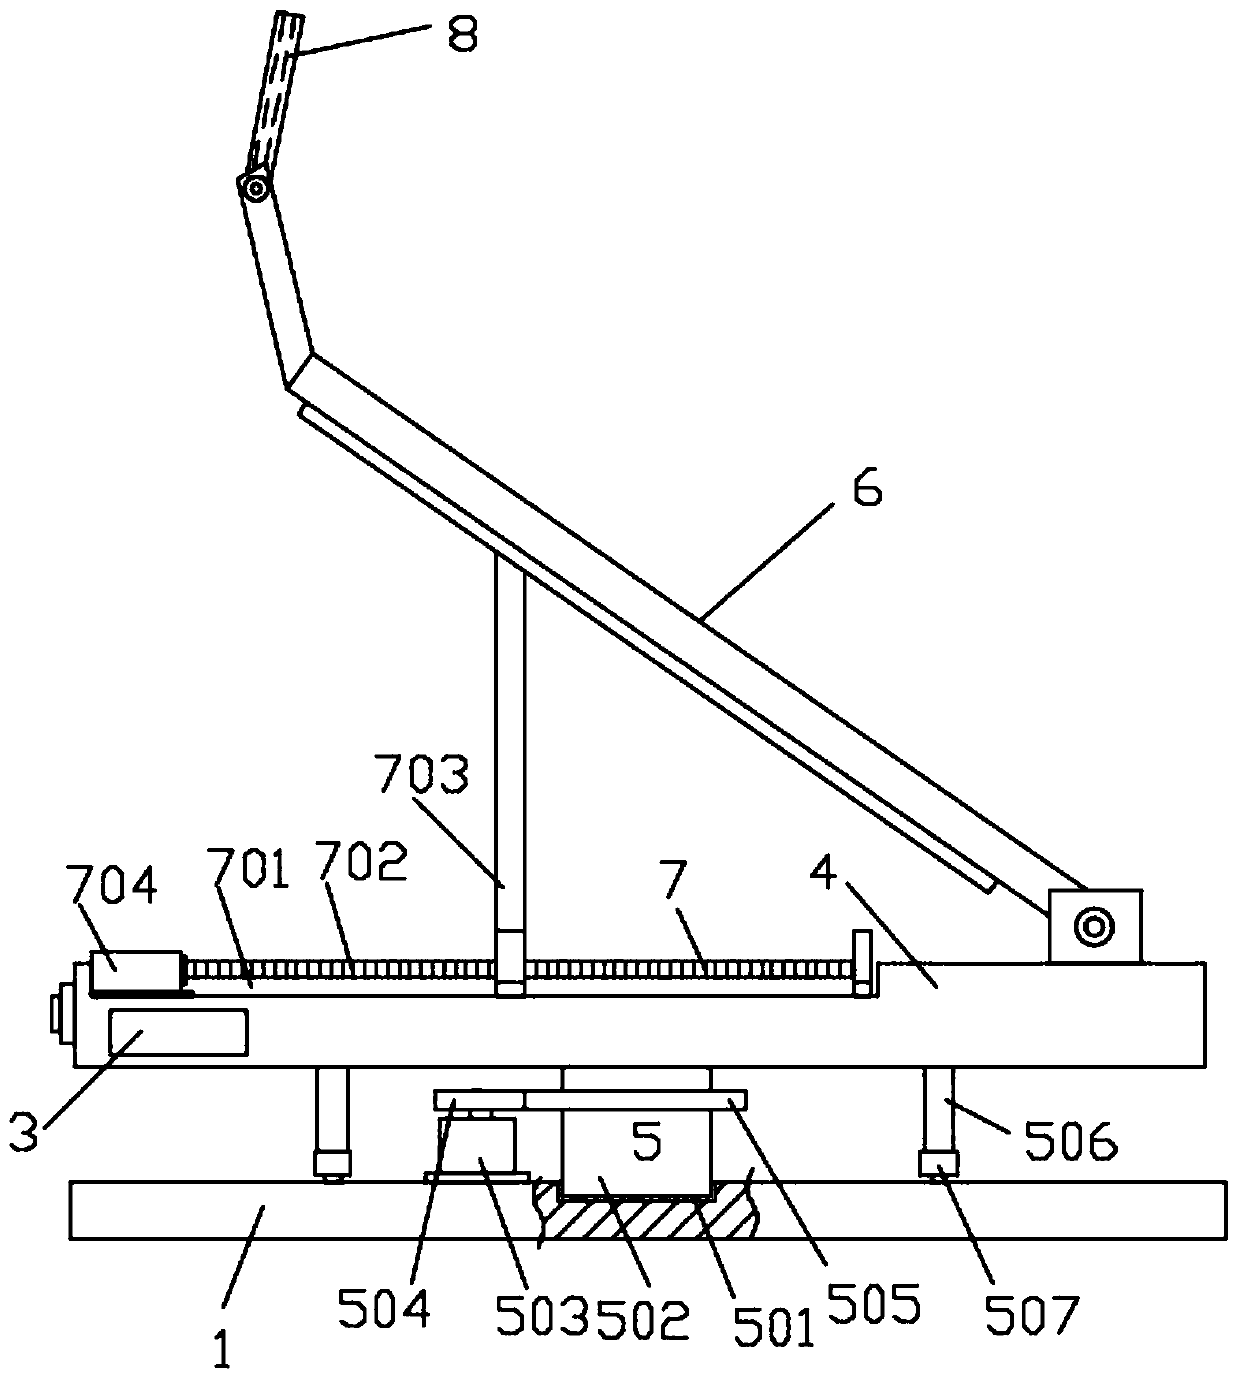 Shoe air-drying frame capable of automatically carrying out regulation